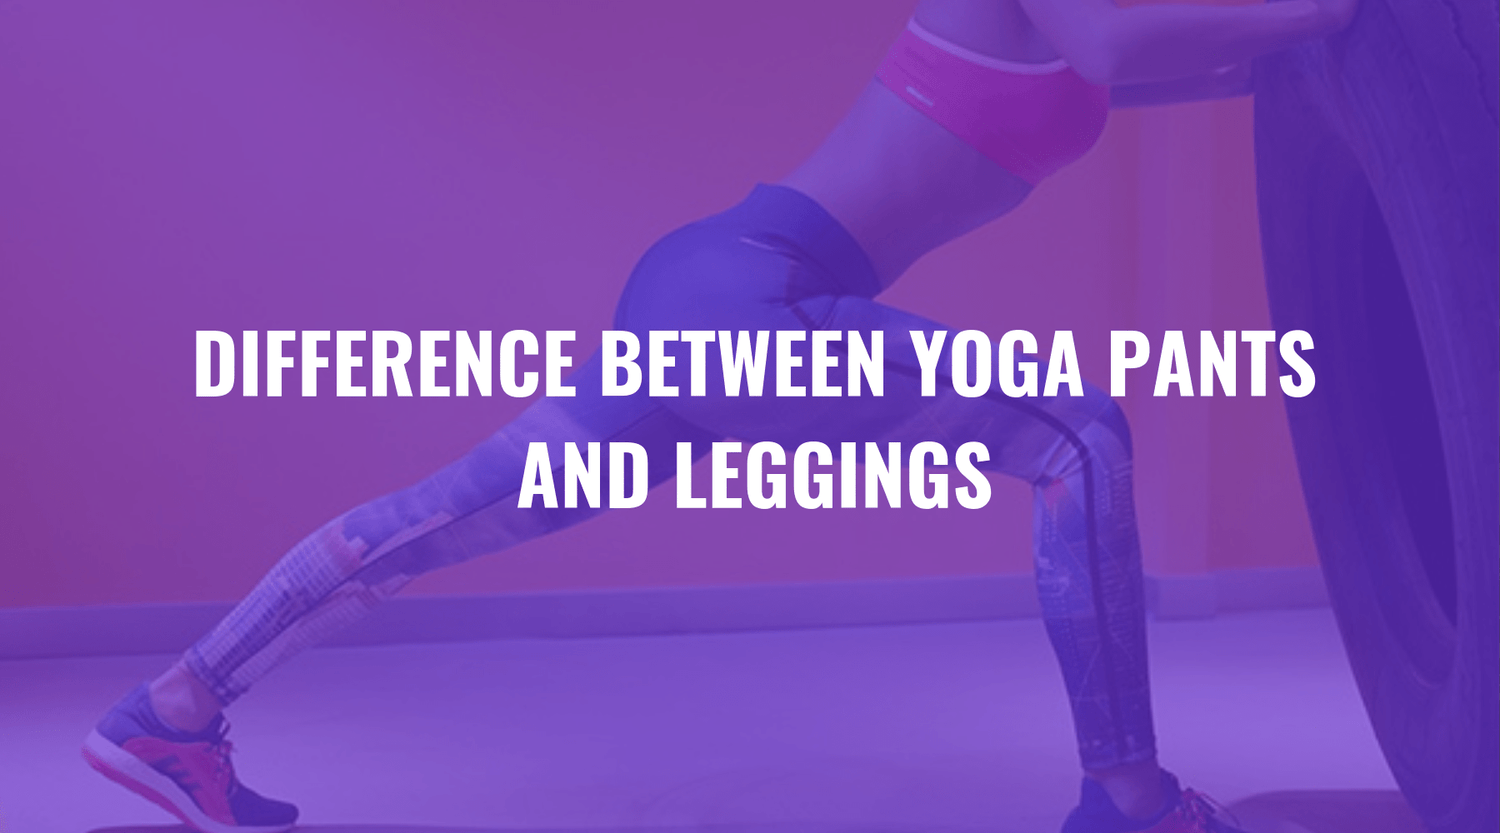 Legging vs Yoga Pants: What is the Difference?